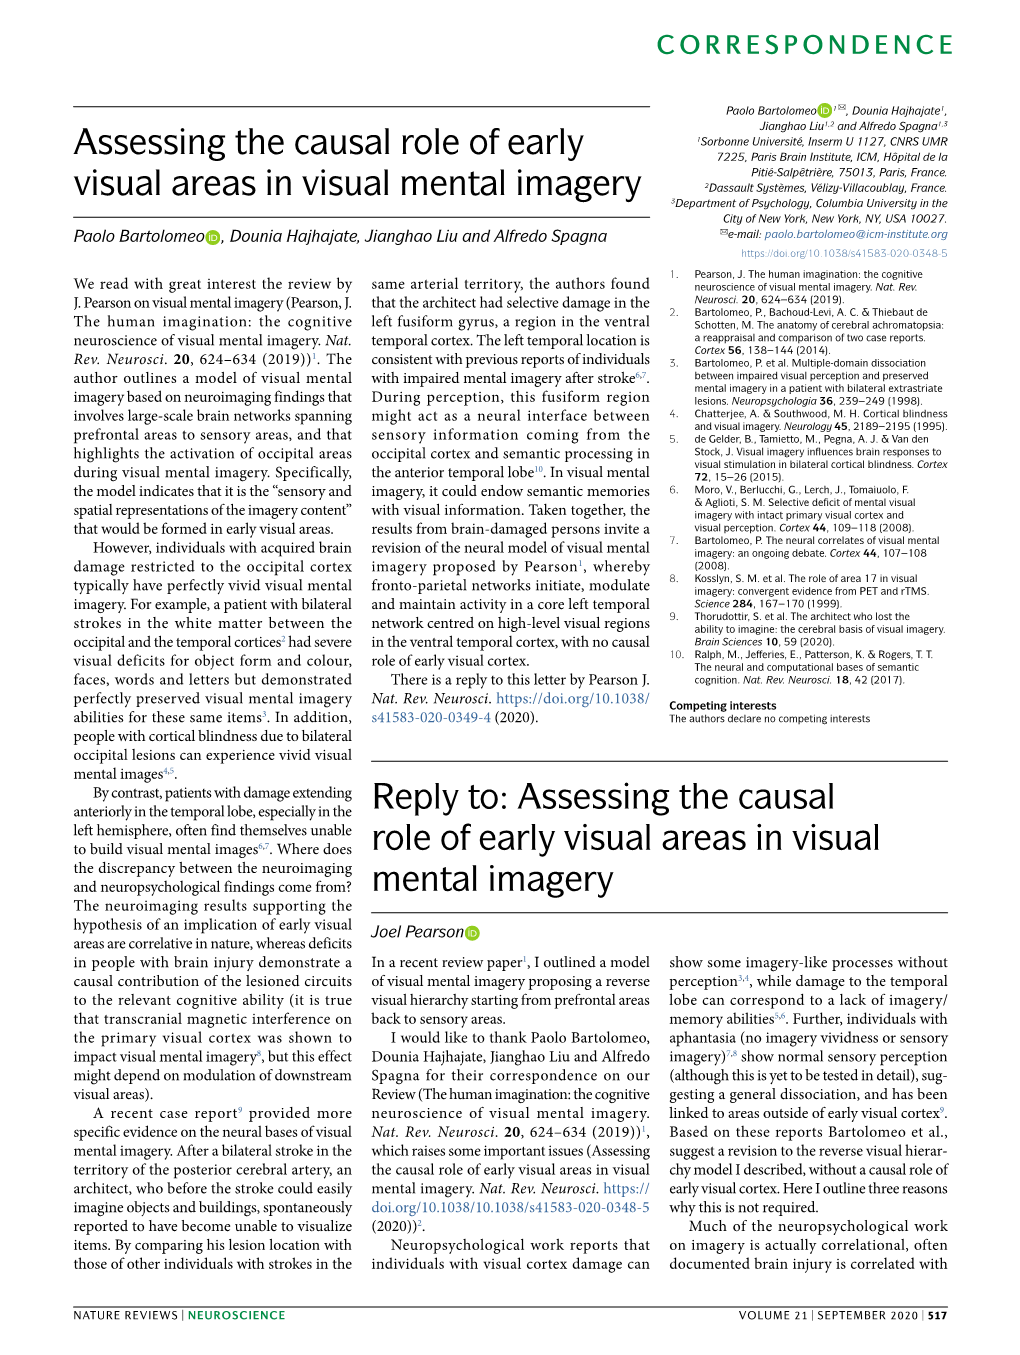 Assessing the Causal Role of Early Visual Areas in Visual